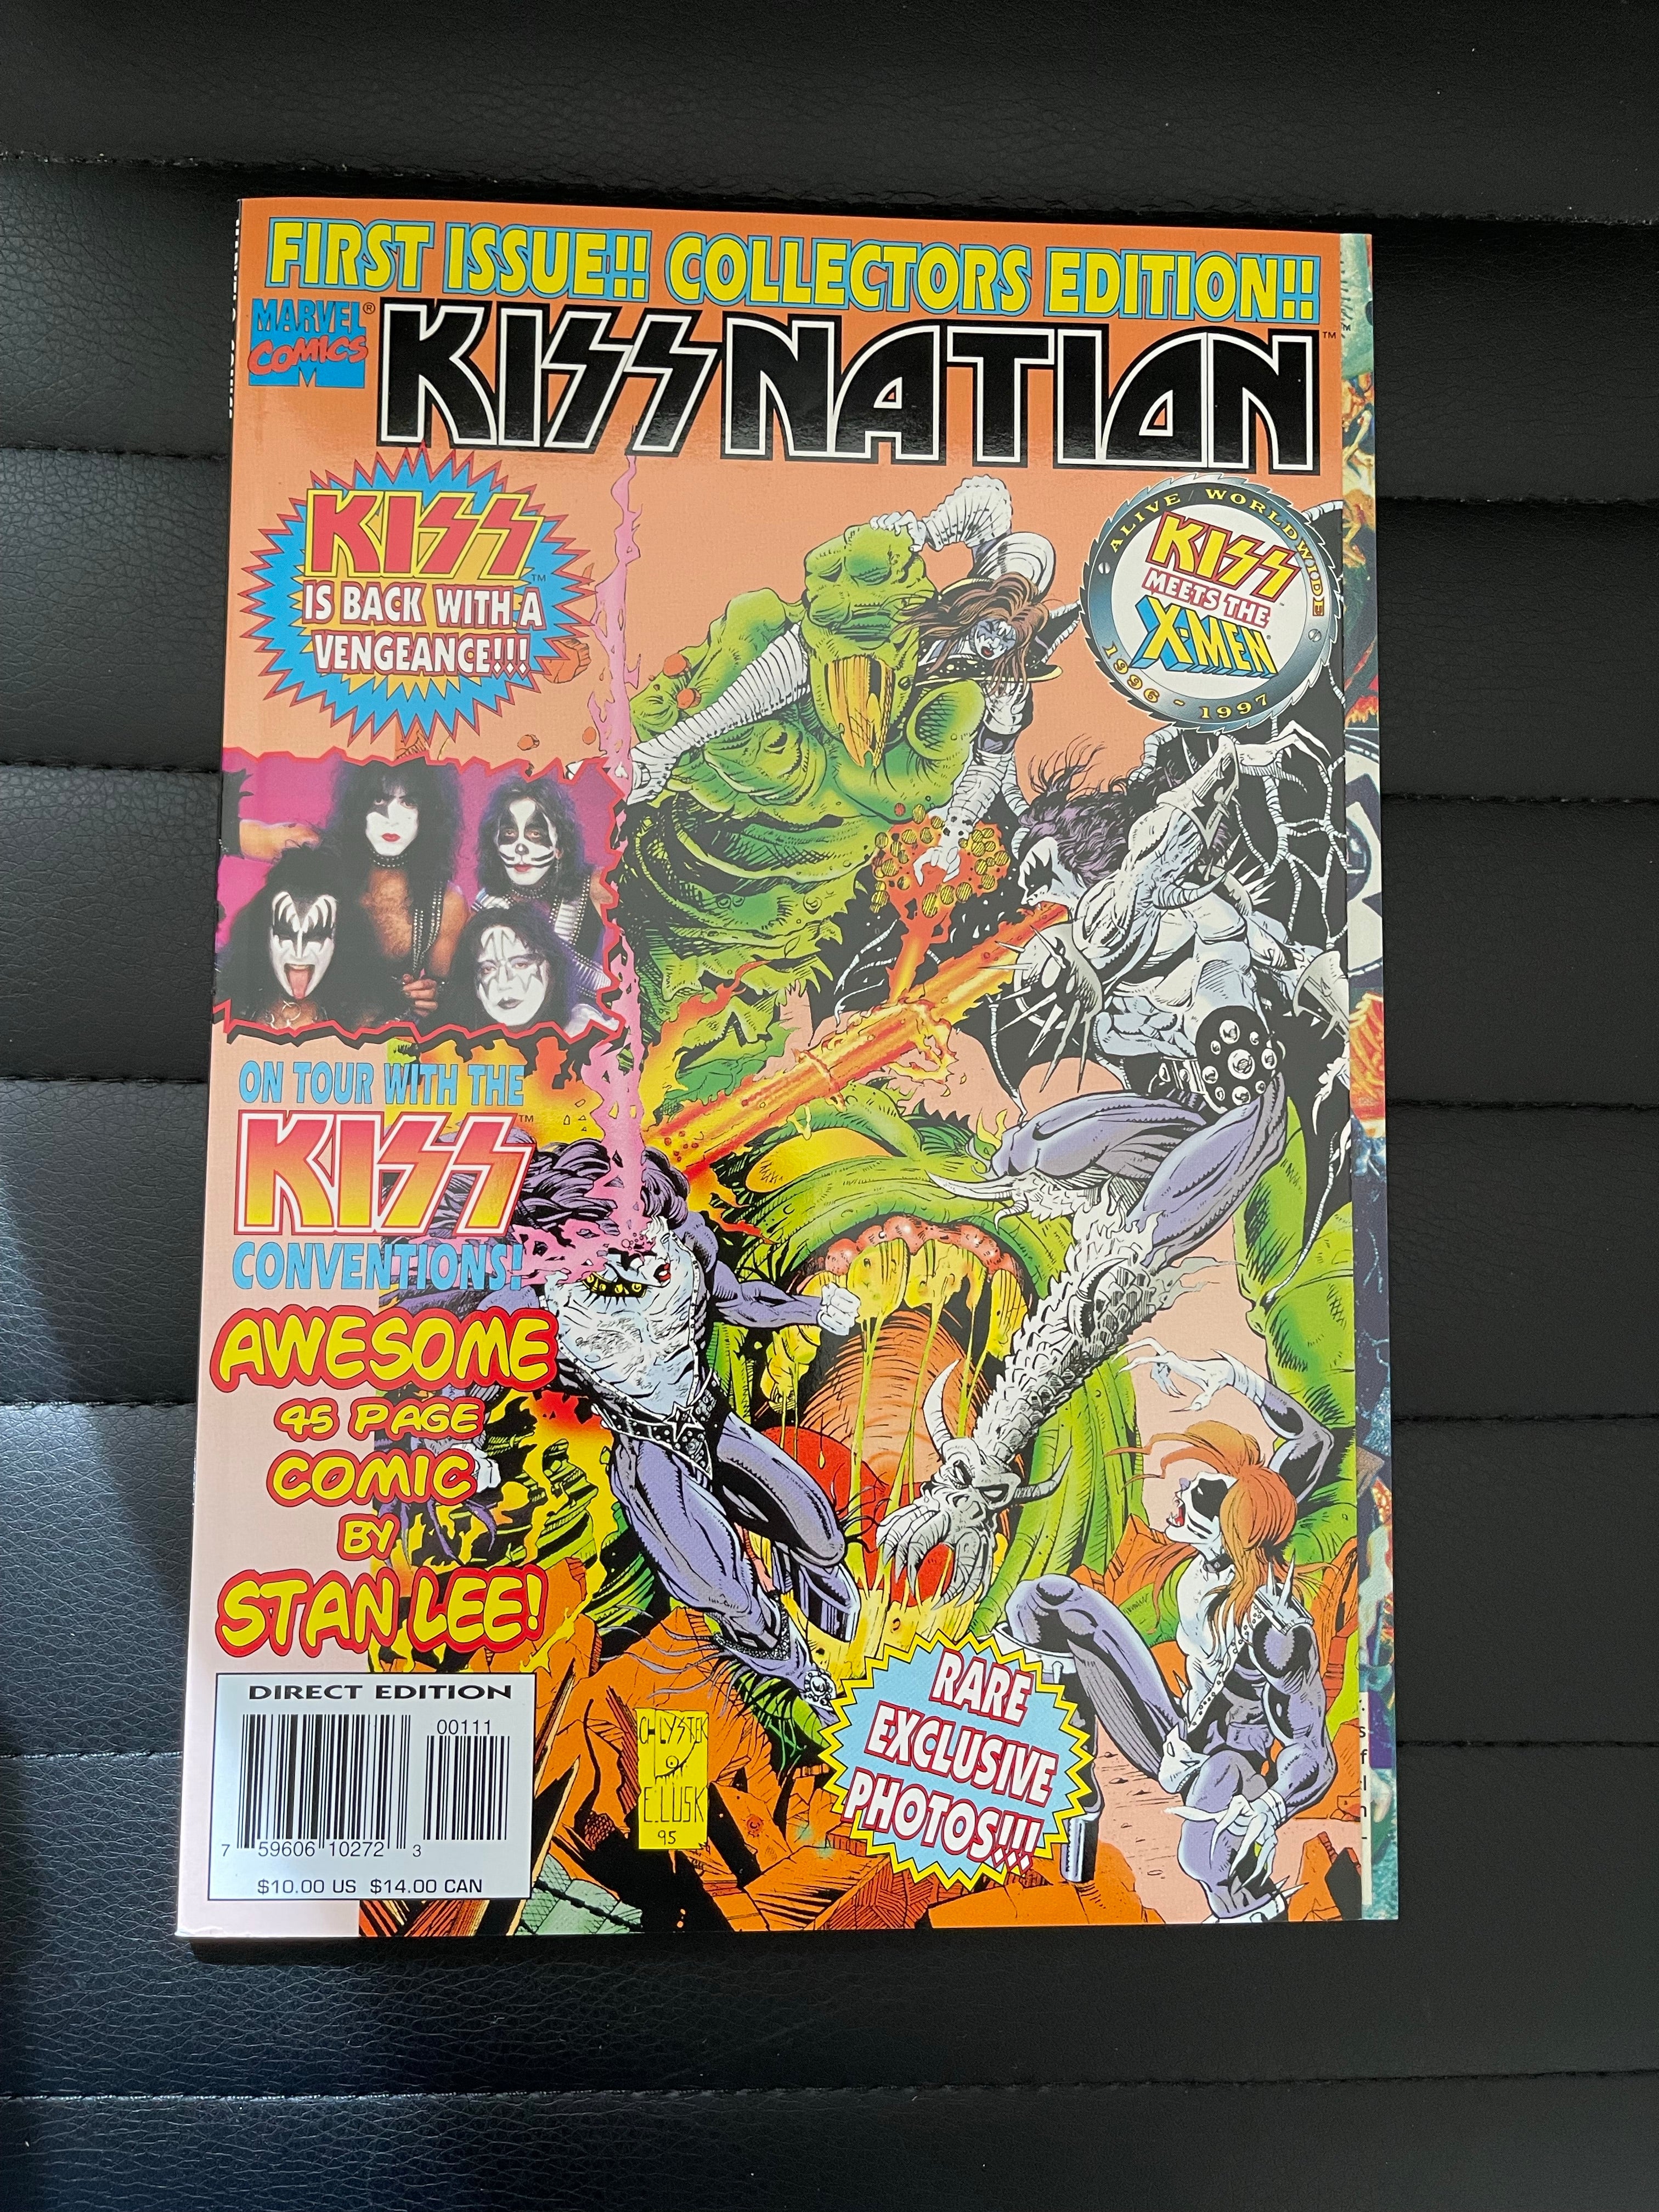 Kissnation rare high grade special issued comic book.